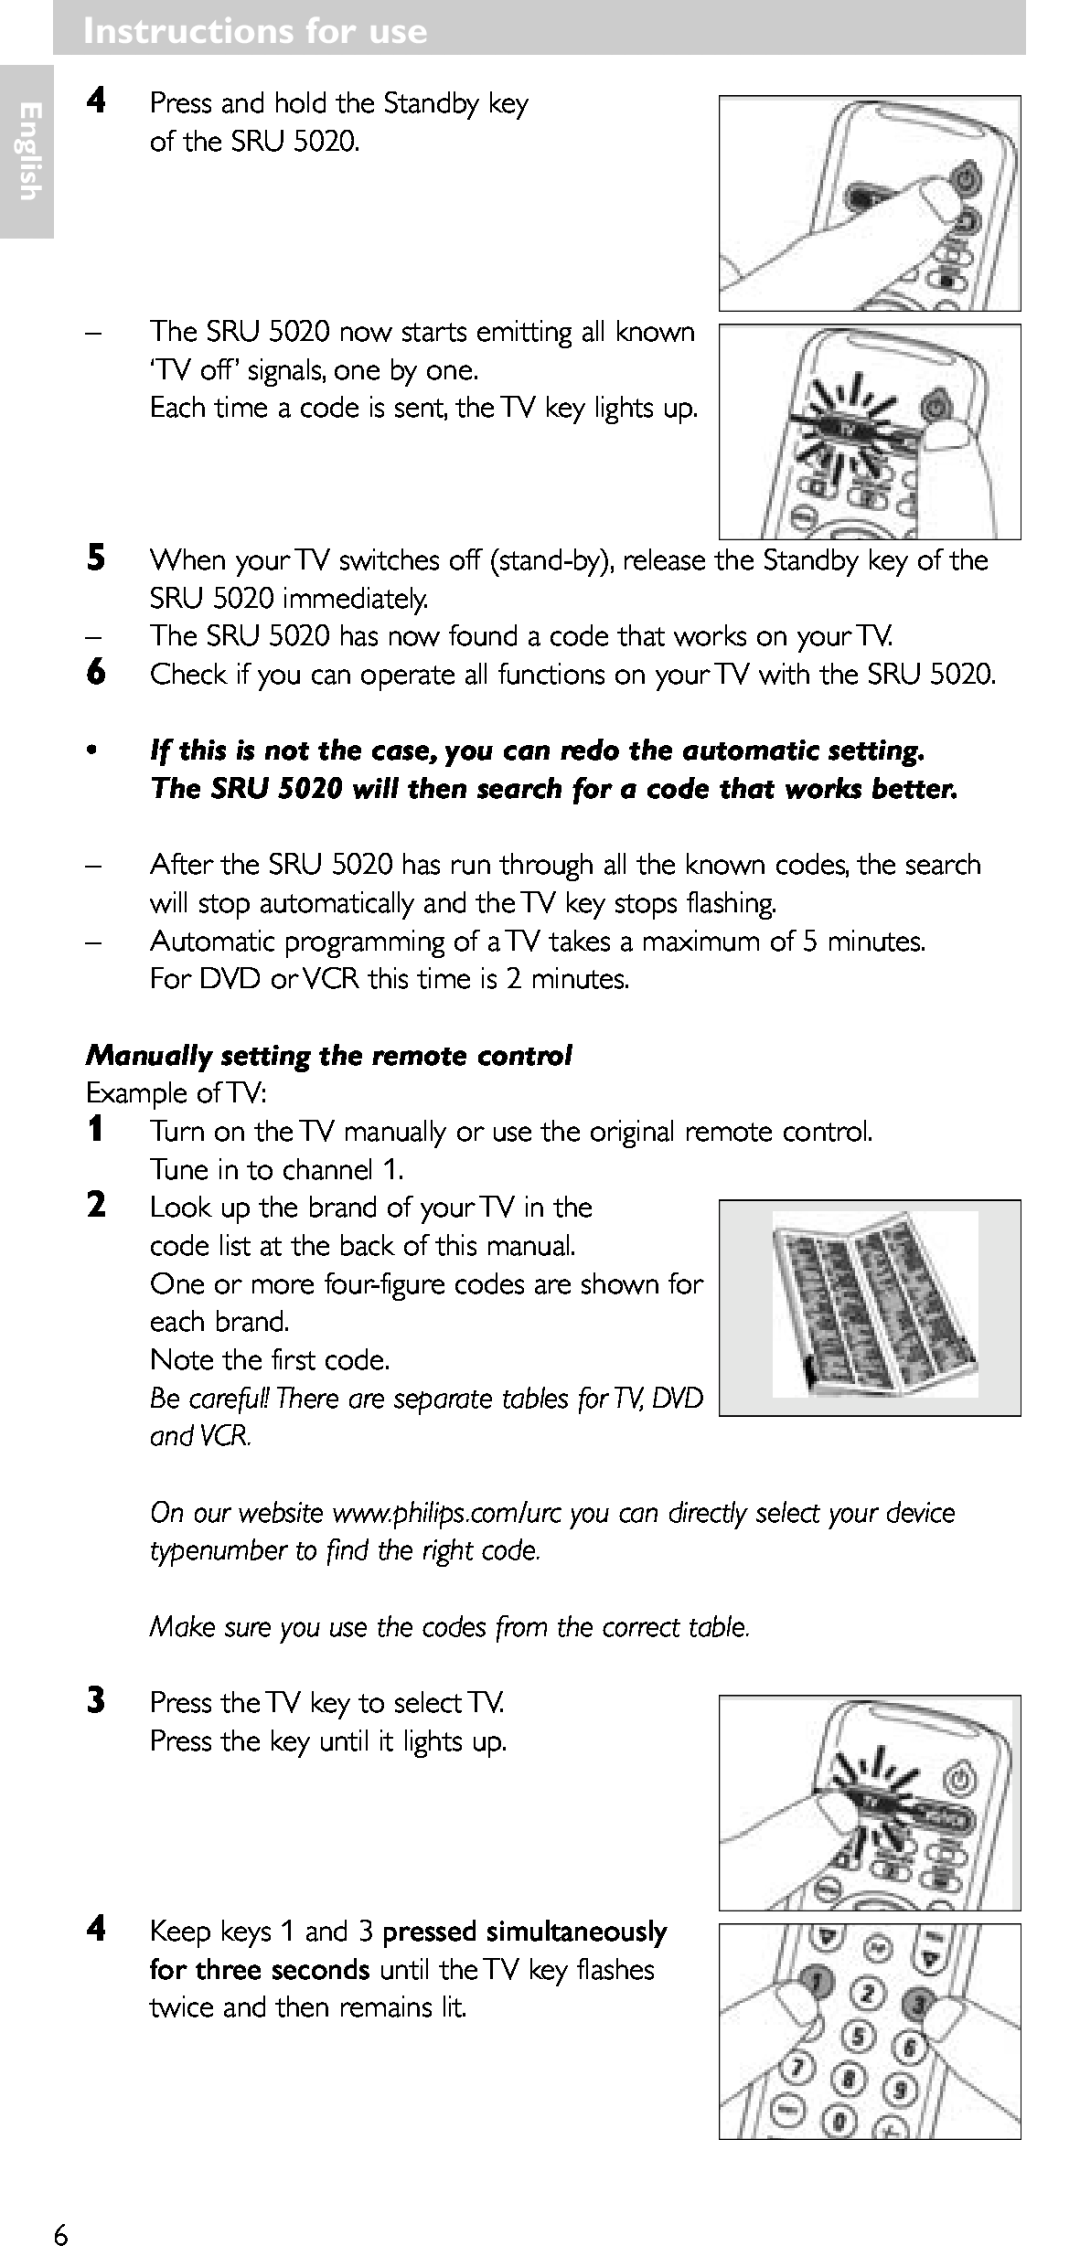 Philips SRU 5020/86 manual Manually setting the remote control, Be careful! There are separate tables for TV, DVD and VCR 